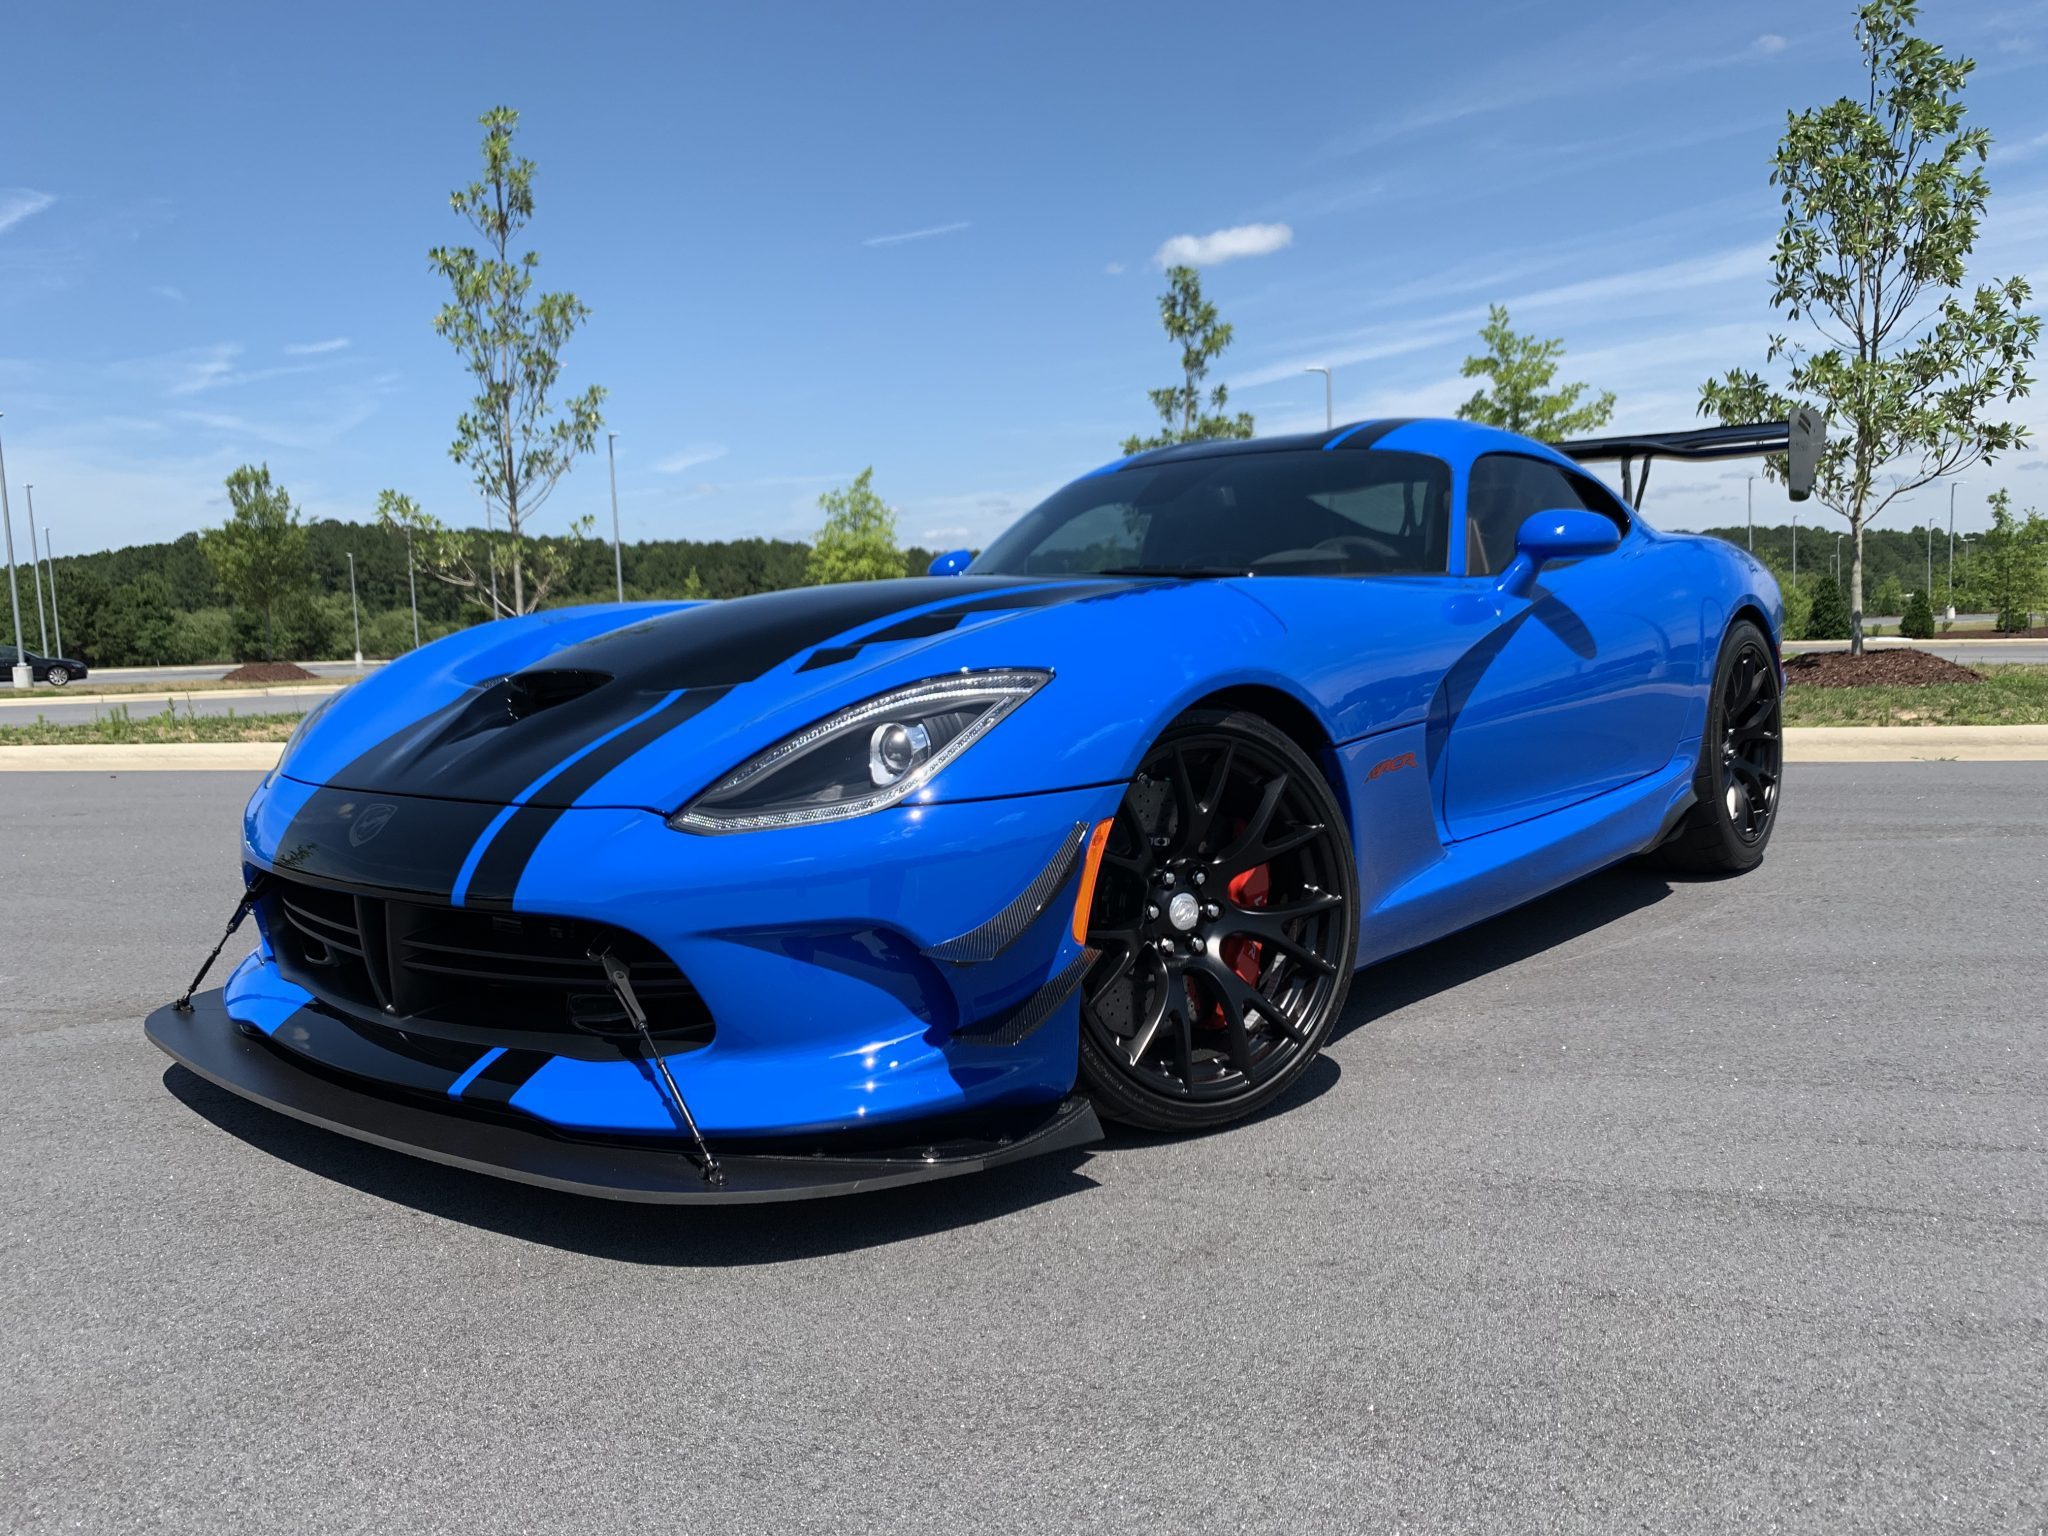 Low Mileage Dodge Viper Acr Extreme Is Begging To Be Driven Carscoops